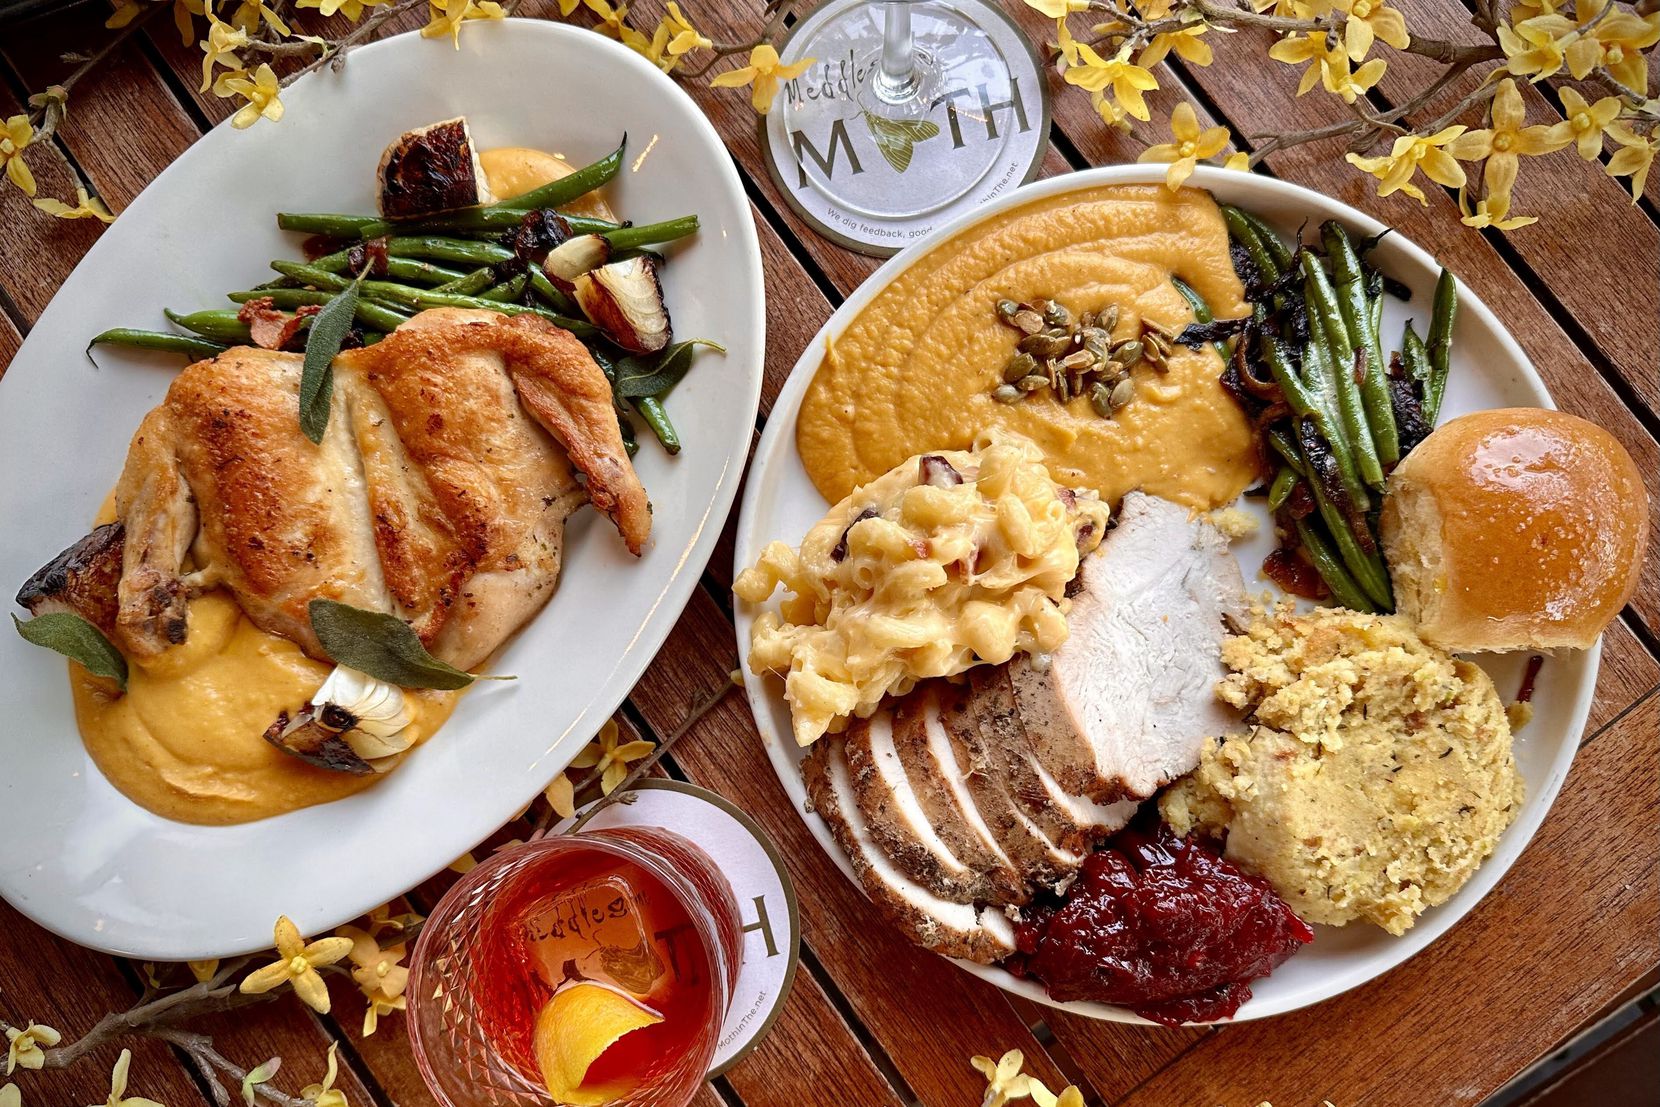 What is the least liked Thanksgiving food? per The Vacationer